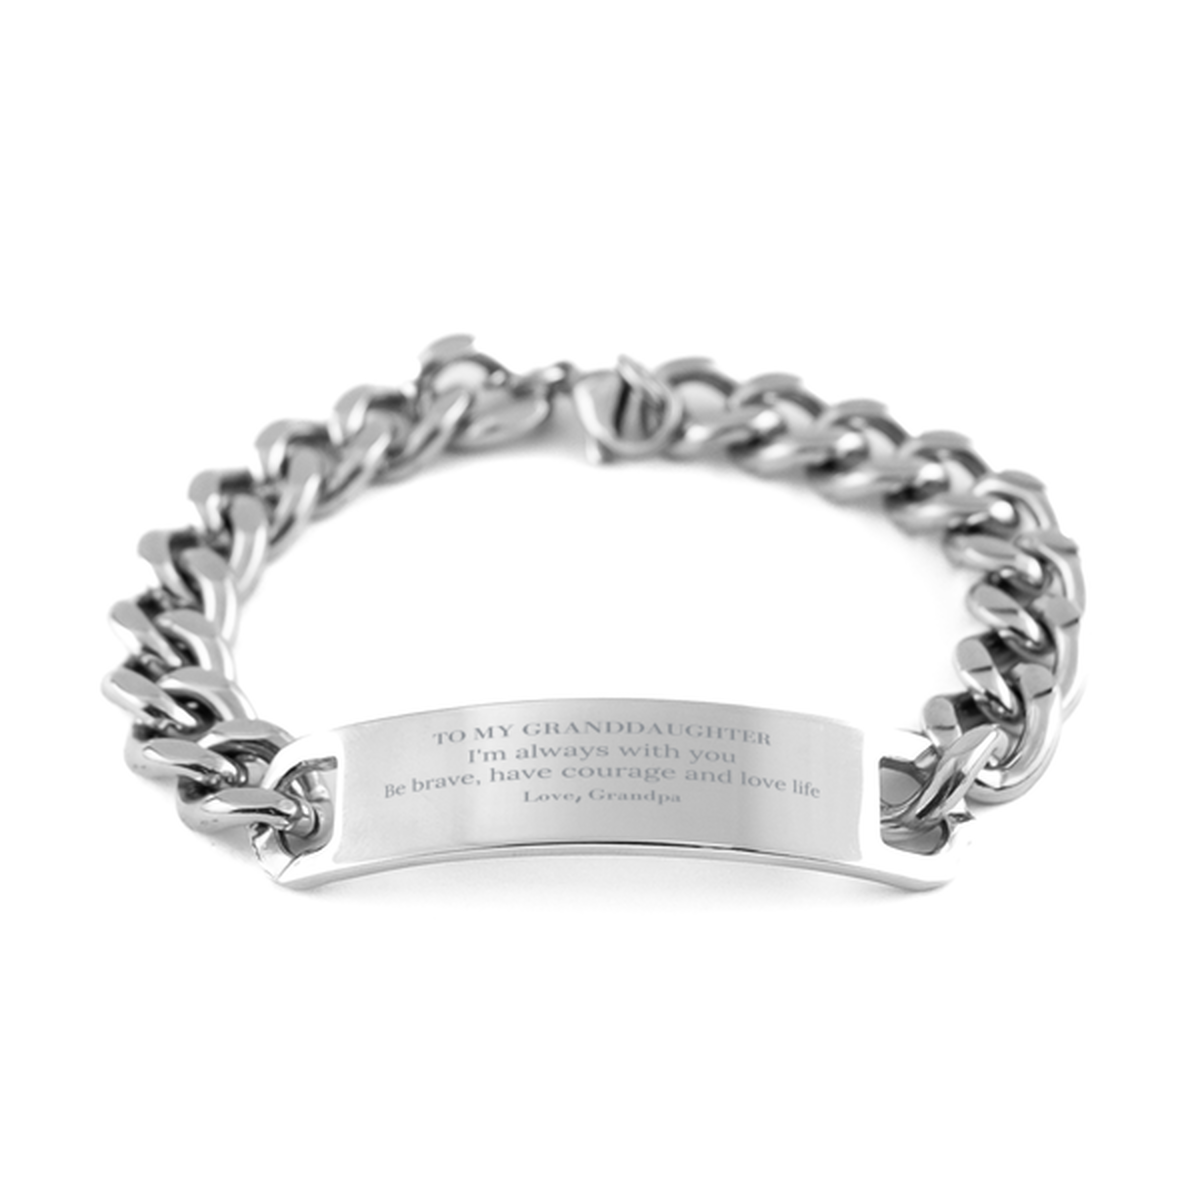 To My Granddaughter Gifts from Grandpa, Unique Cuban Chain Stainless Steel Bracelet Inspirational Christmas Birthday Graduation Gifts for Granddaughter I'm always with you. Be brave, have courage and love life. Love, Grandpa